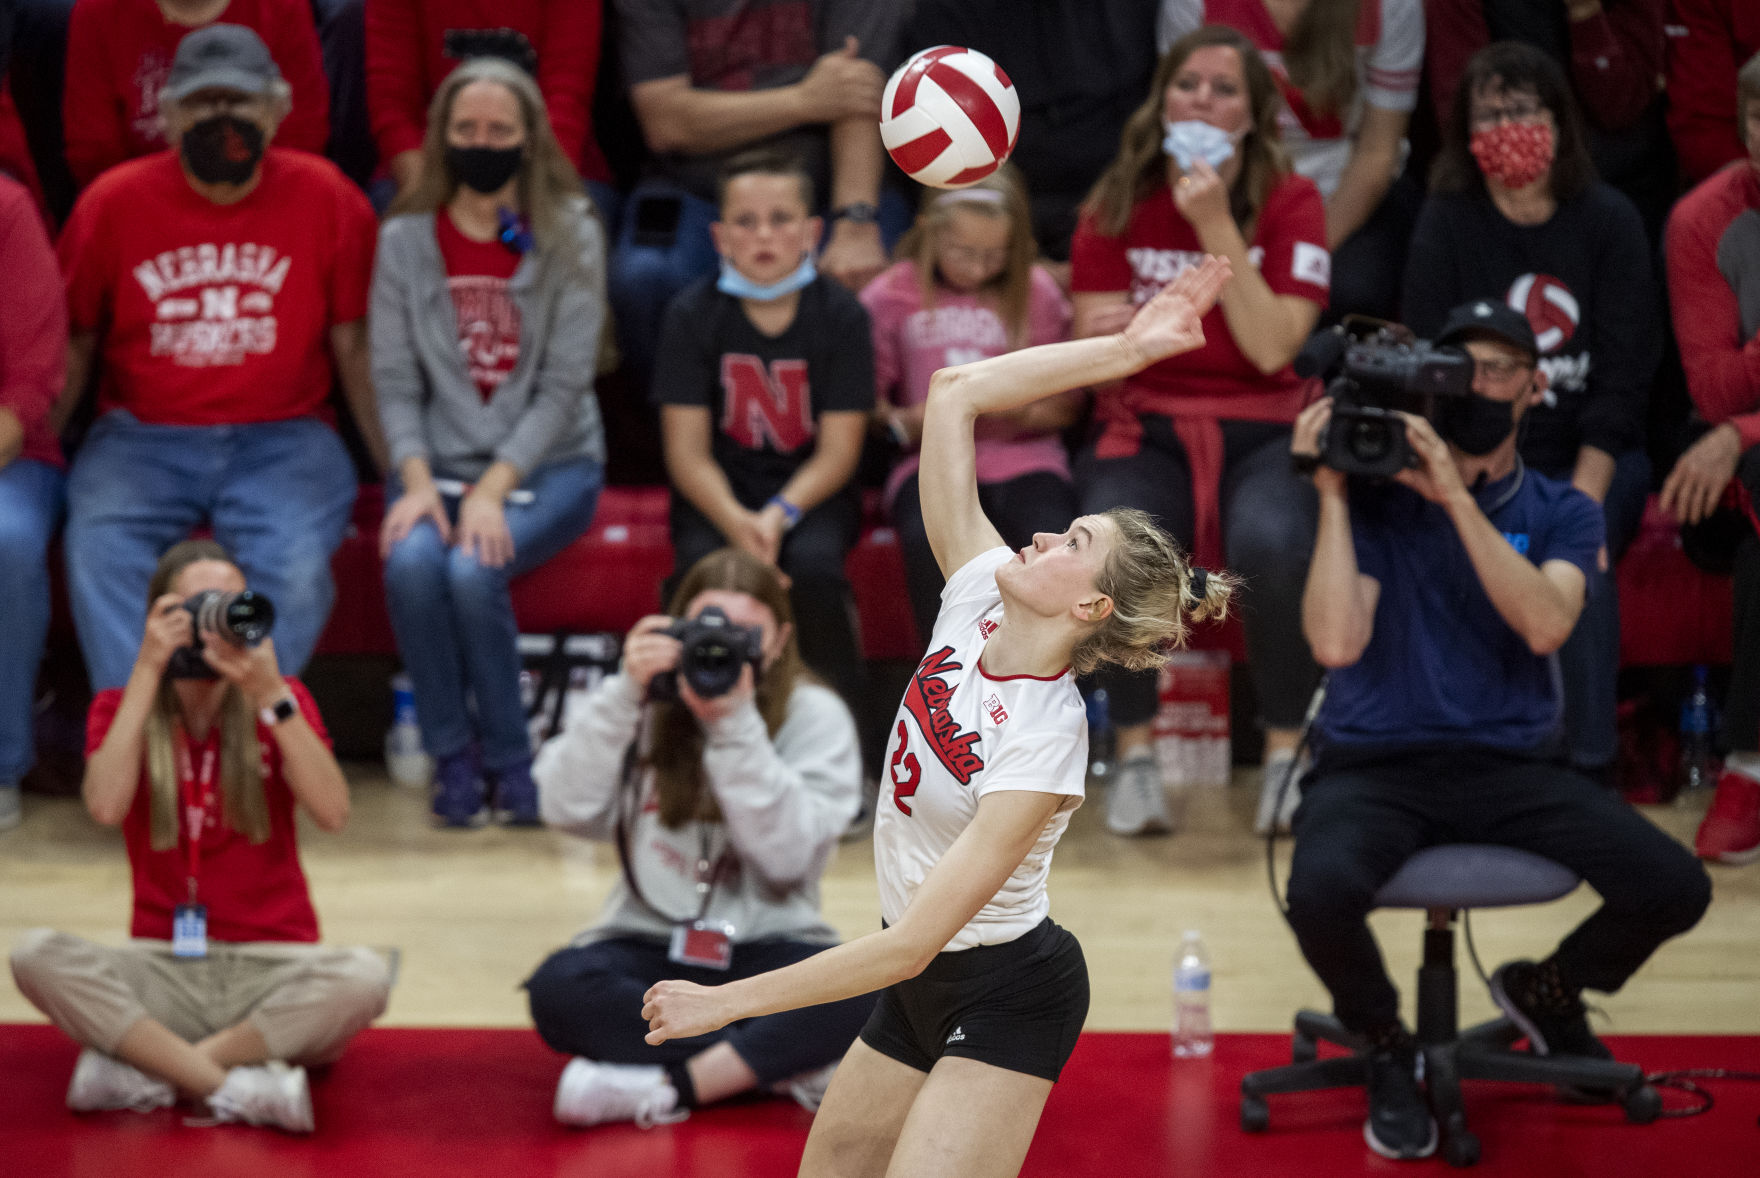 How to watch the Huskers during the first (and maybe second) round of the NCAA volleyball tourney